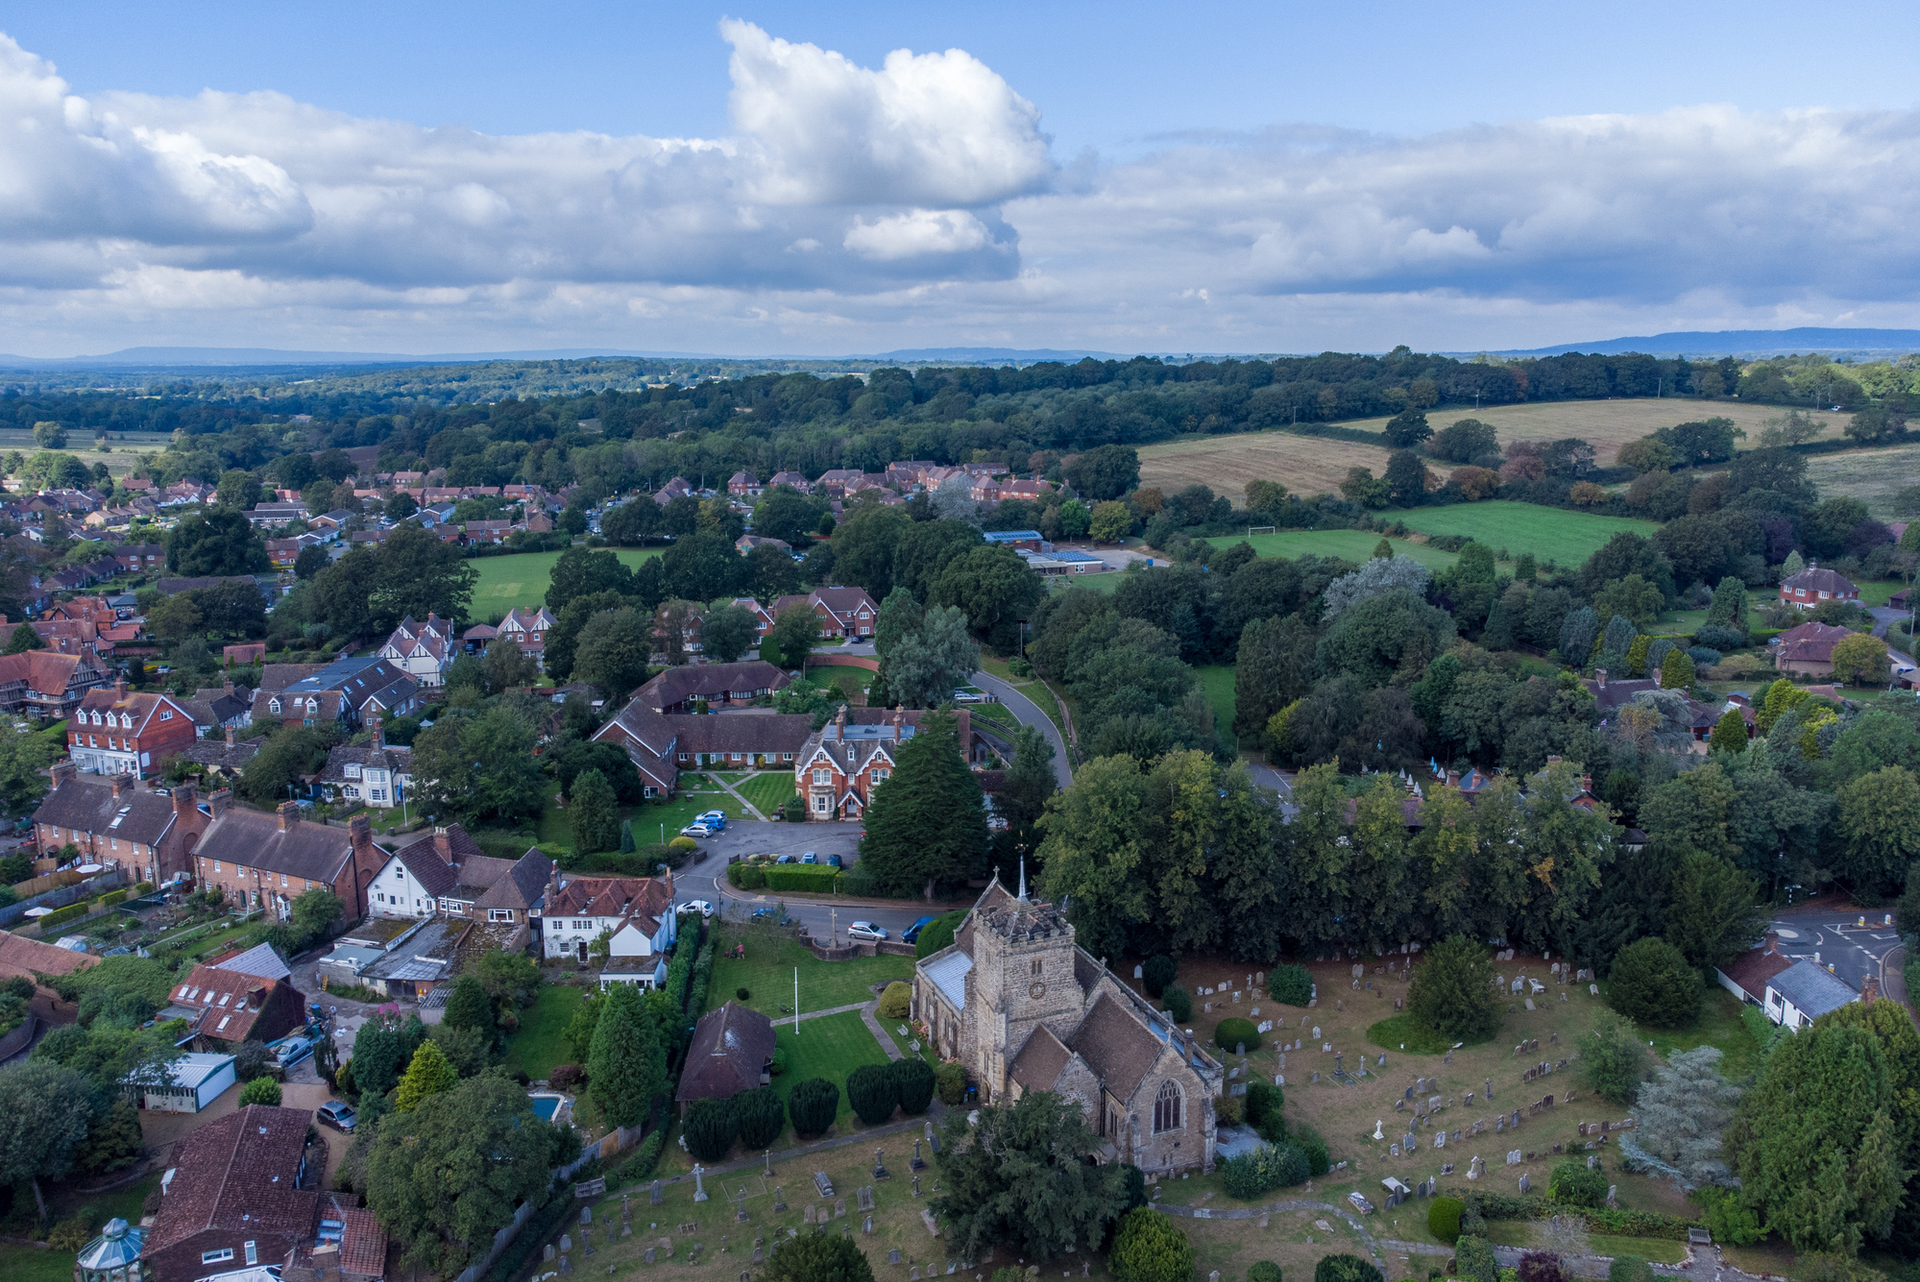 Horsham from a birds-eye point of view